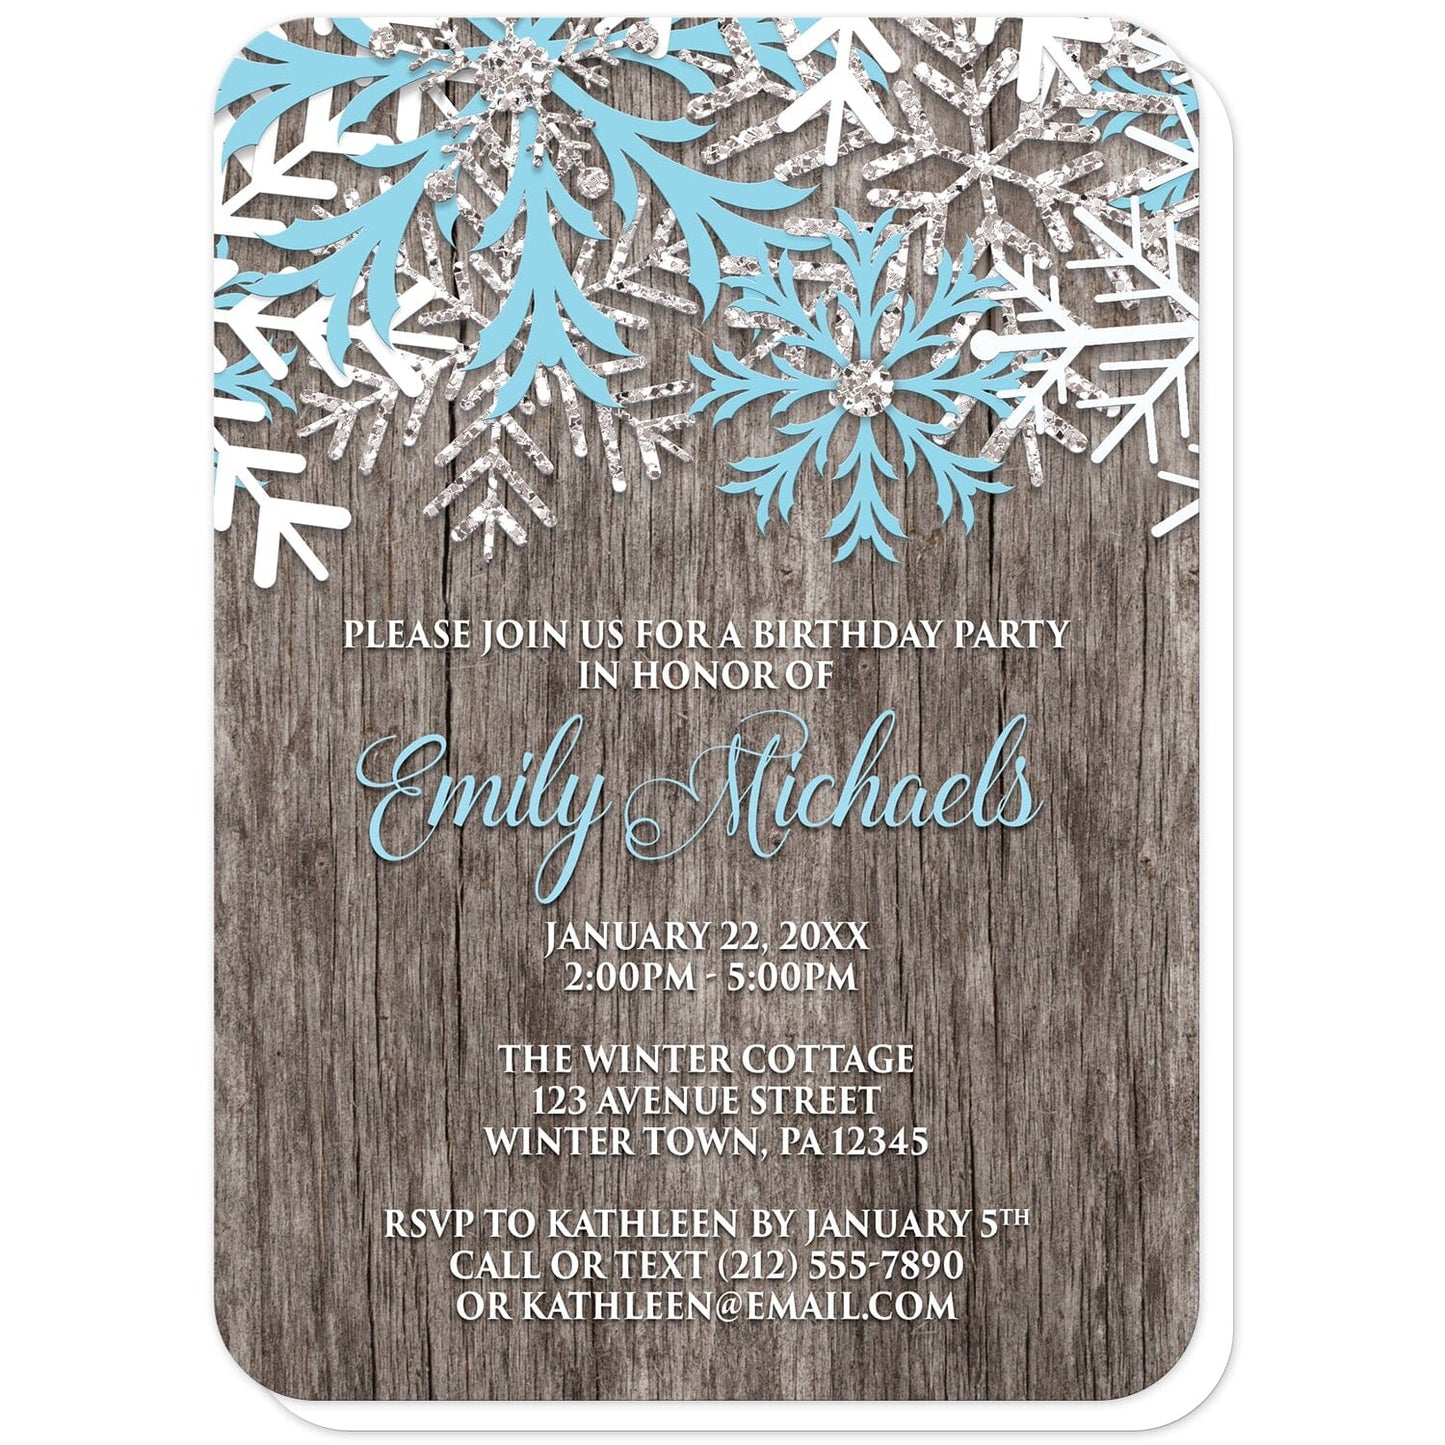 Rustic Winter Wood Blue Snowflake Birthday Invitations (with rounded corners) at Artistically Invited. Country-inspired rustic winter wood blue snowflake birthday invitations designed with light blue, white, and silver-colored glitter-illustrated snowflakes along the top over a rustic wood pattern illustration. Your personalized birthday party details are custom printed in light blue and white over the wood background below the snowflakes.